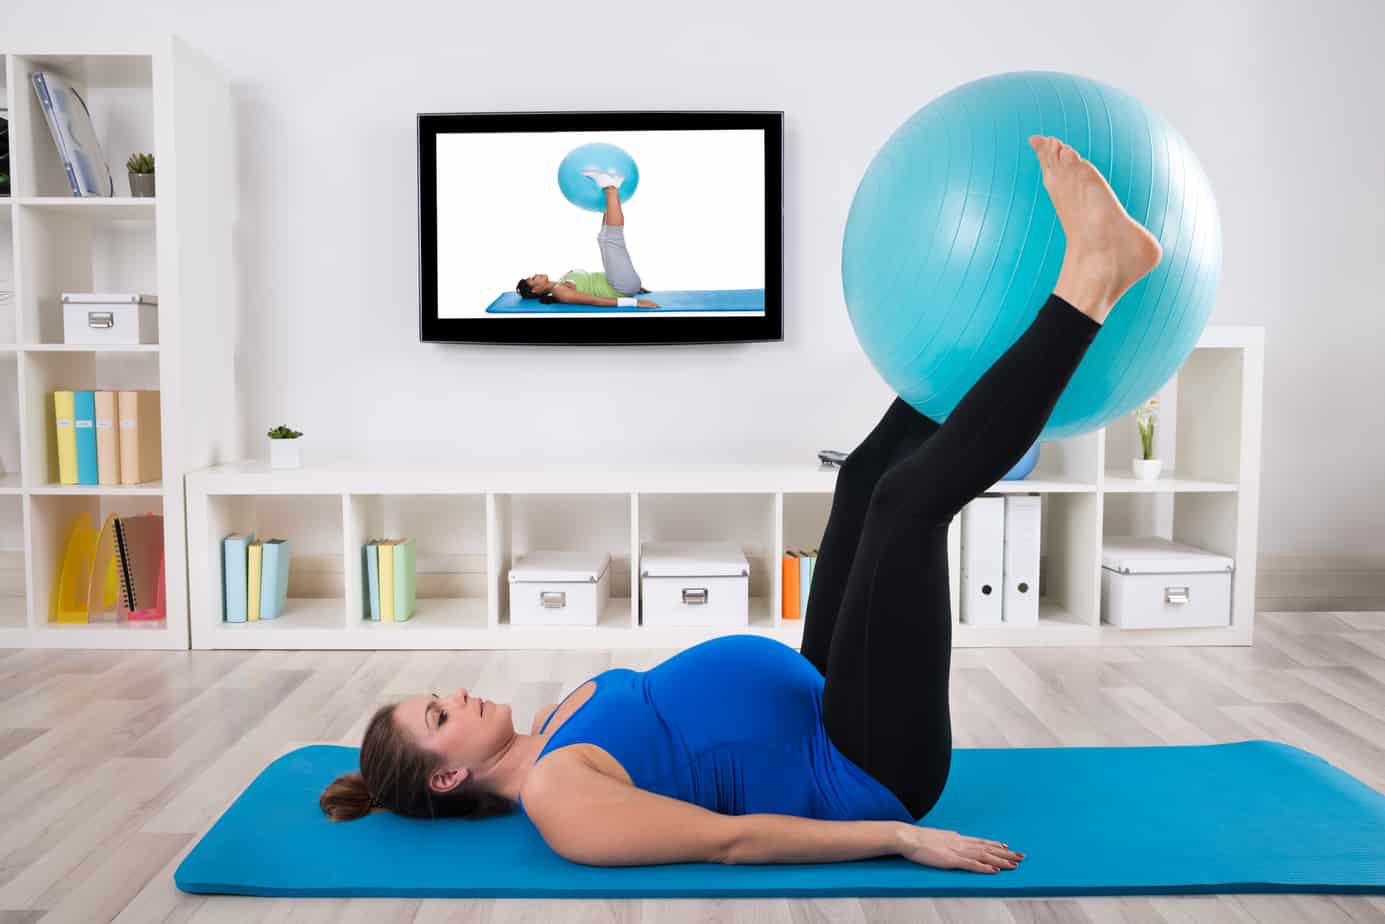 Pregnant woman exercising with video on TV in background.